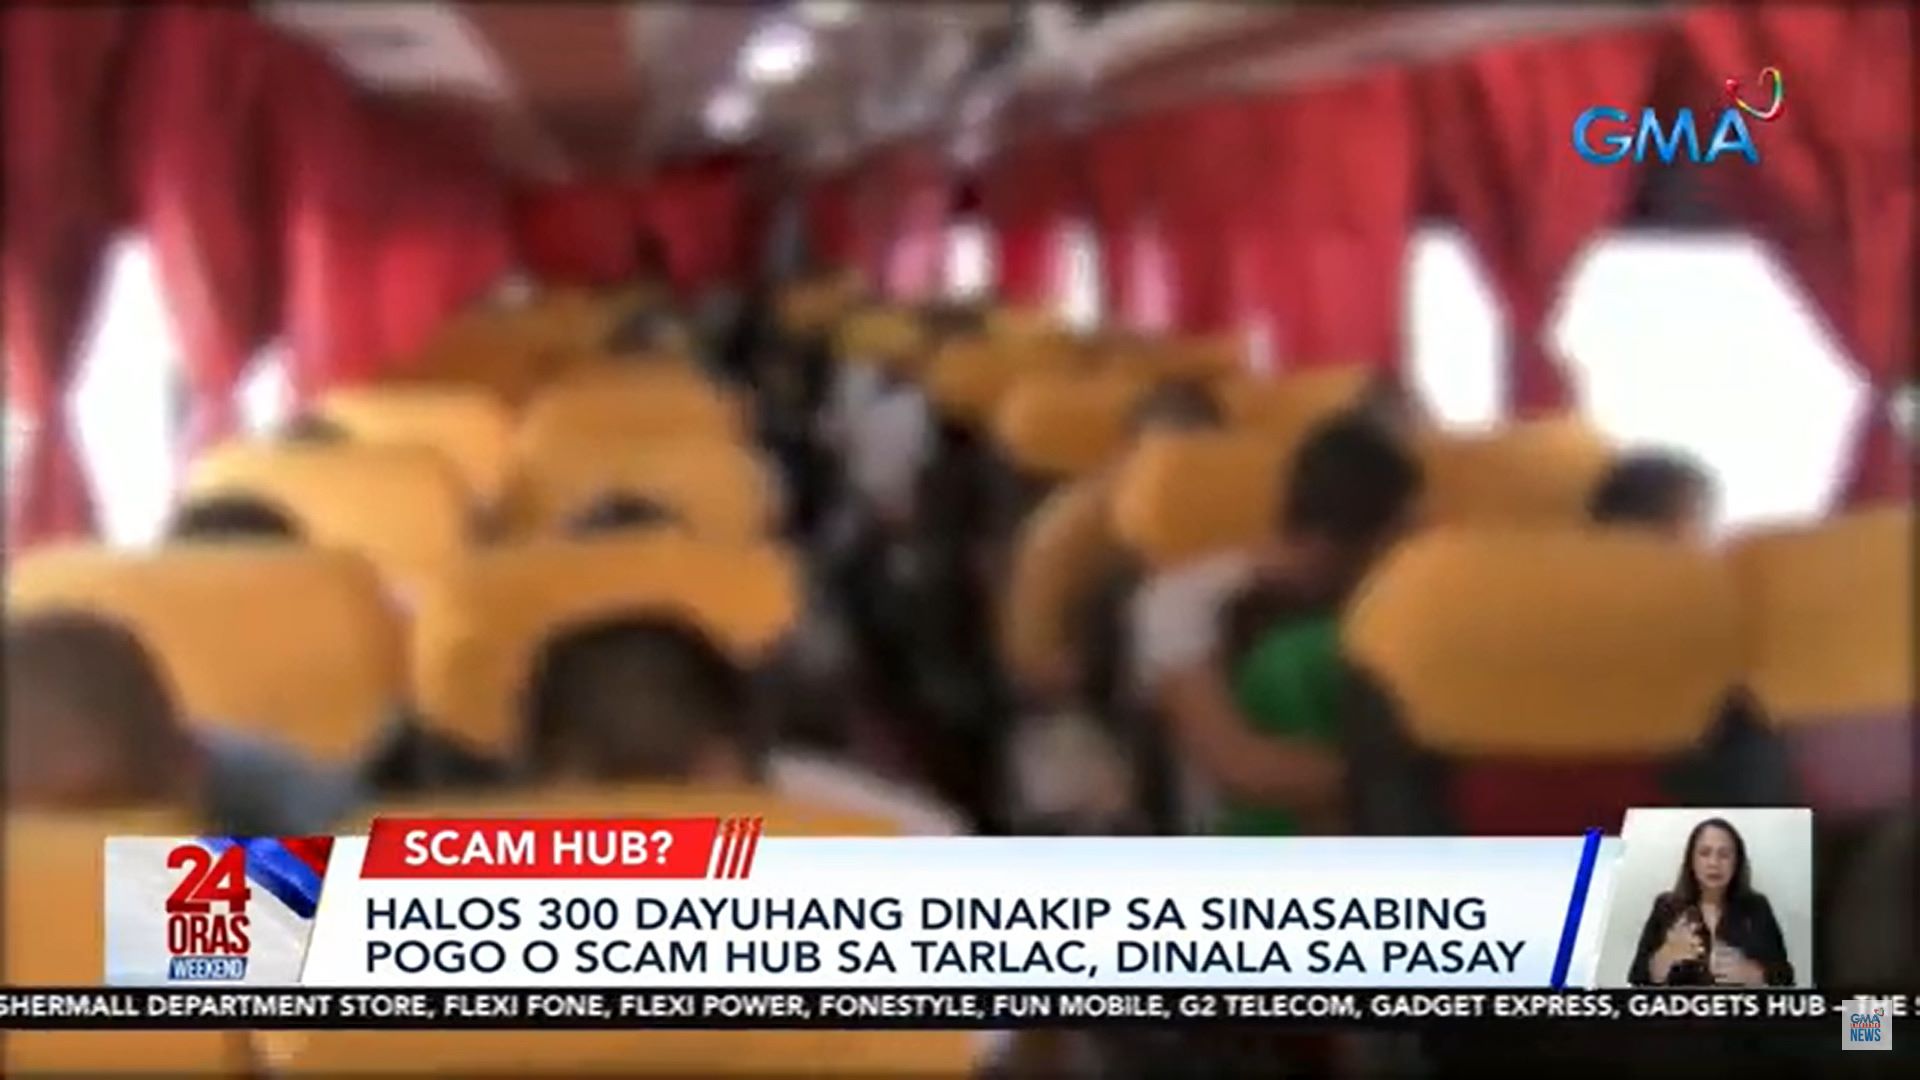 Nearly 300 foreigners caught at Tarlac scam hub brought to Metro Manila